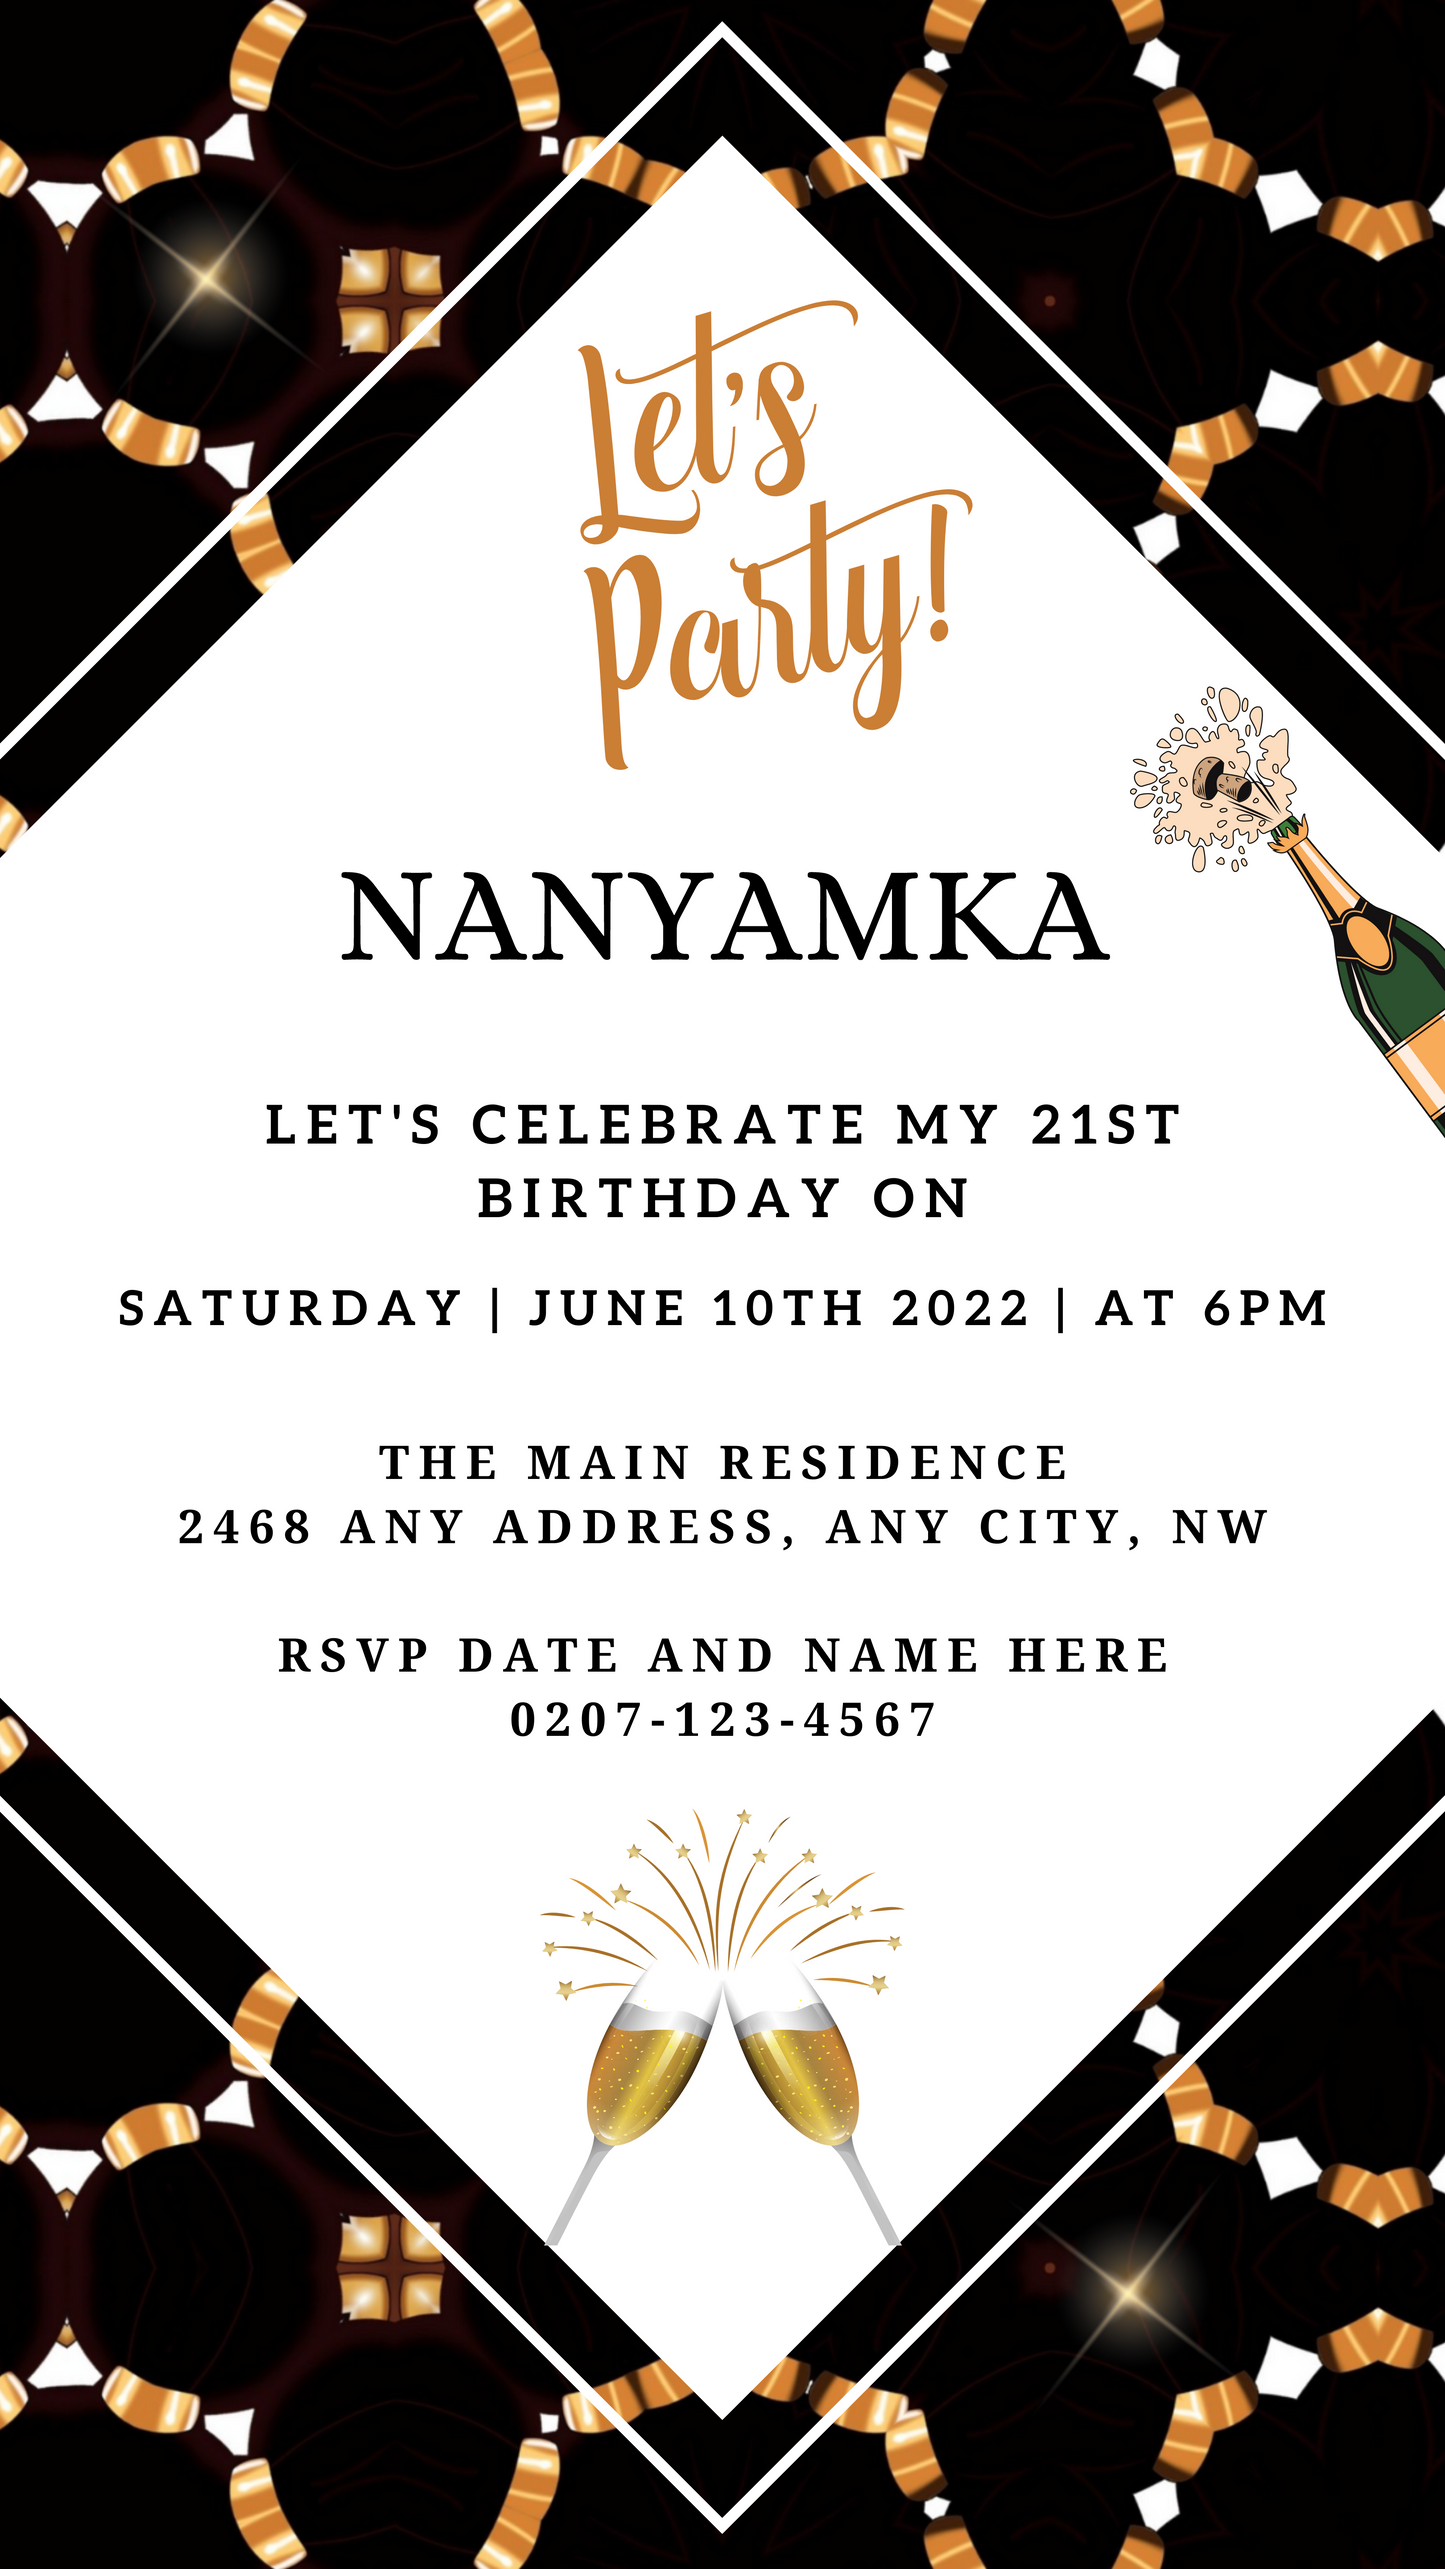 Editable White Beige Gold African Ankara Party Evite featuring customizable text and champagne glasses, designed for easy personalization via Canva on any device.